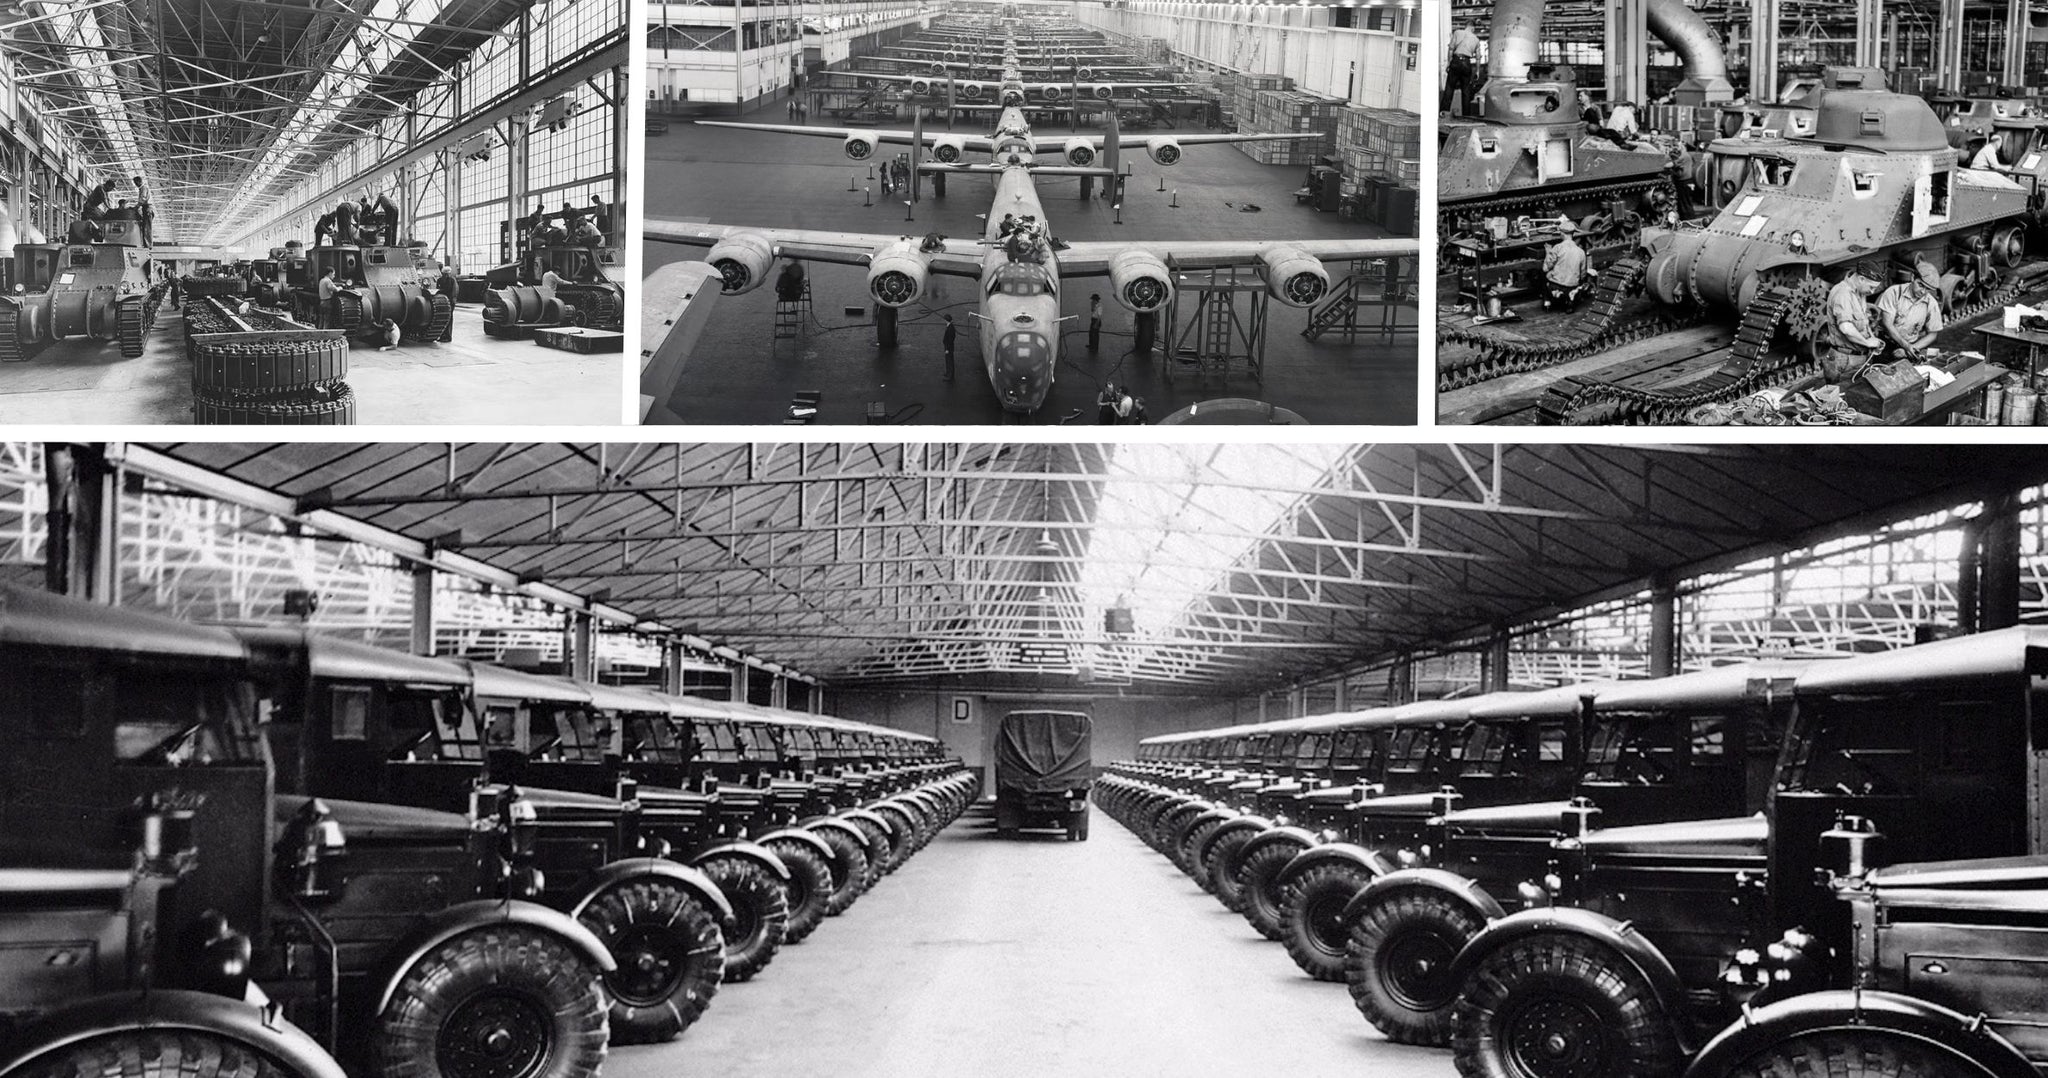 AUTOMOTIVE INDUSTRY IN WAR TIME